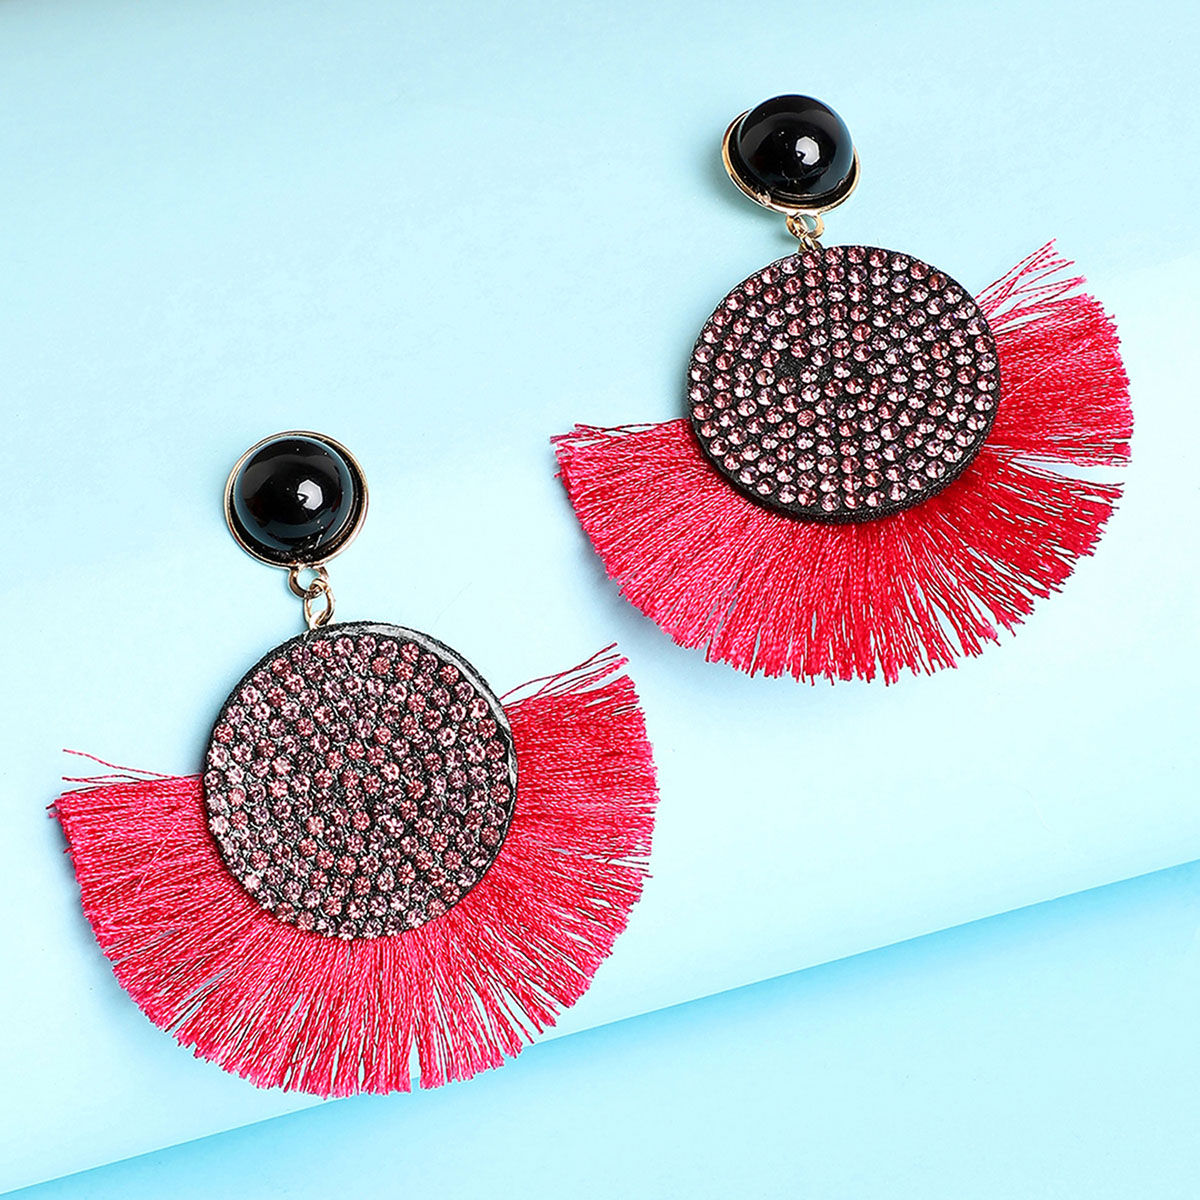 Square Locket With Black Tassel And Earrings